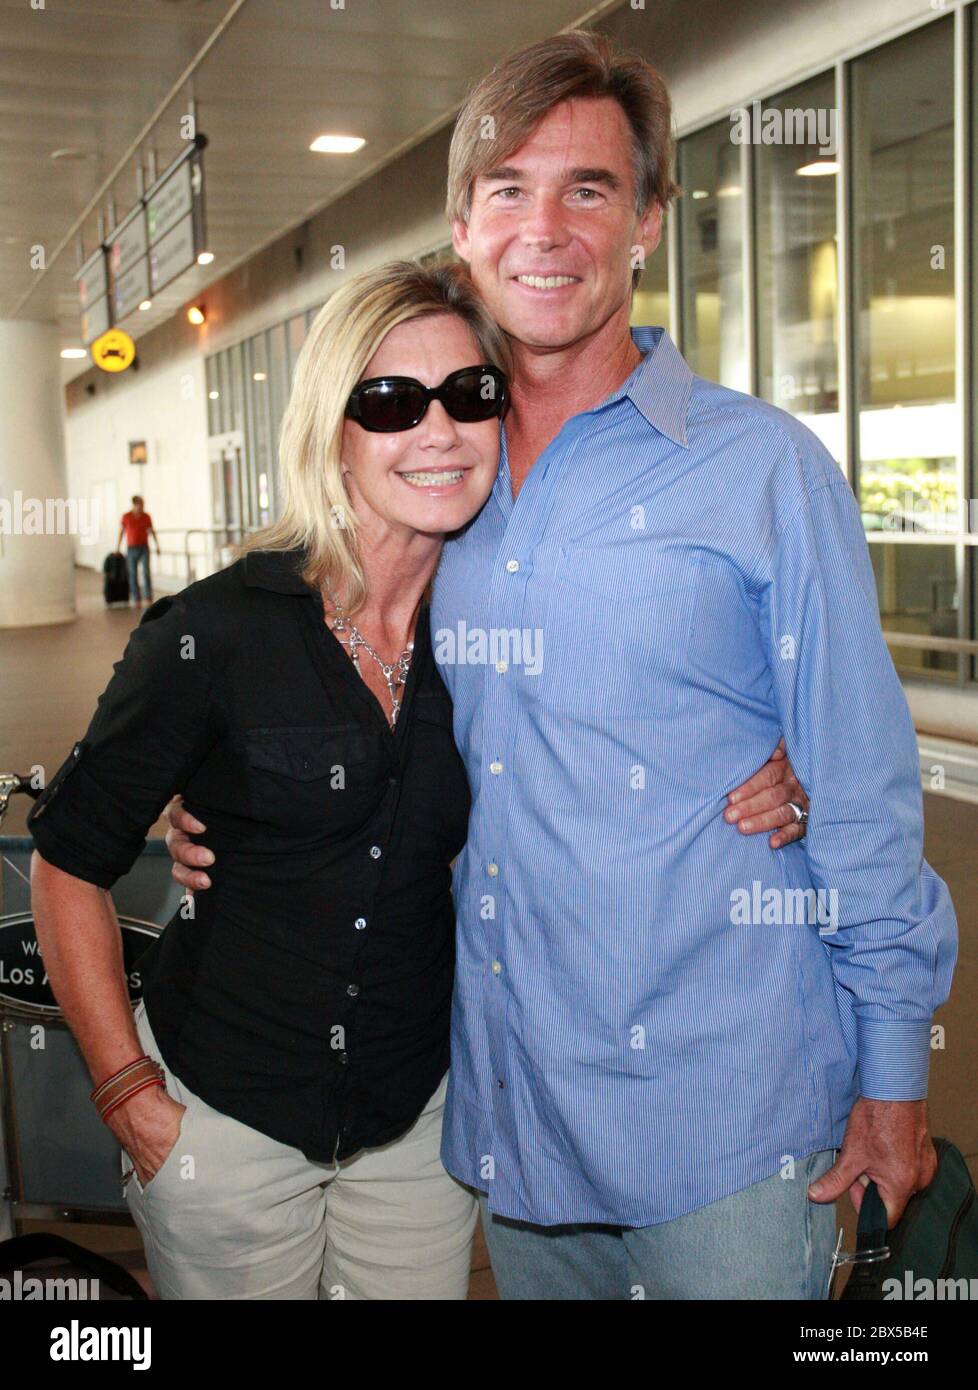 Olivia Newton-John and husband arrive at LAX Airport after a short vacation in Florida. Olivia was glowing and all smiles as she headed home. August 14 2008 Stock Photo